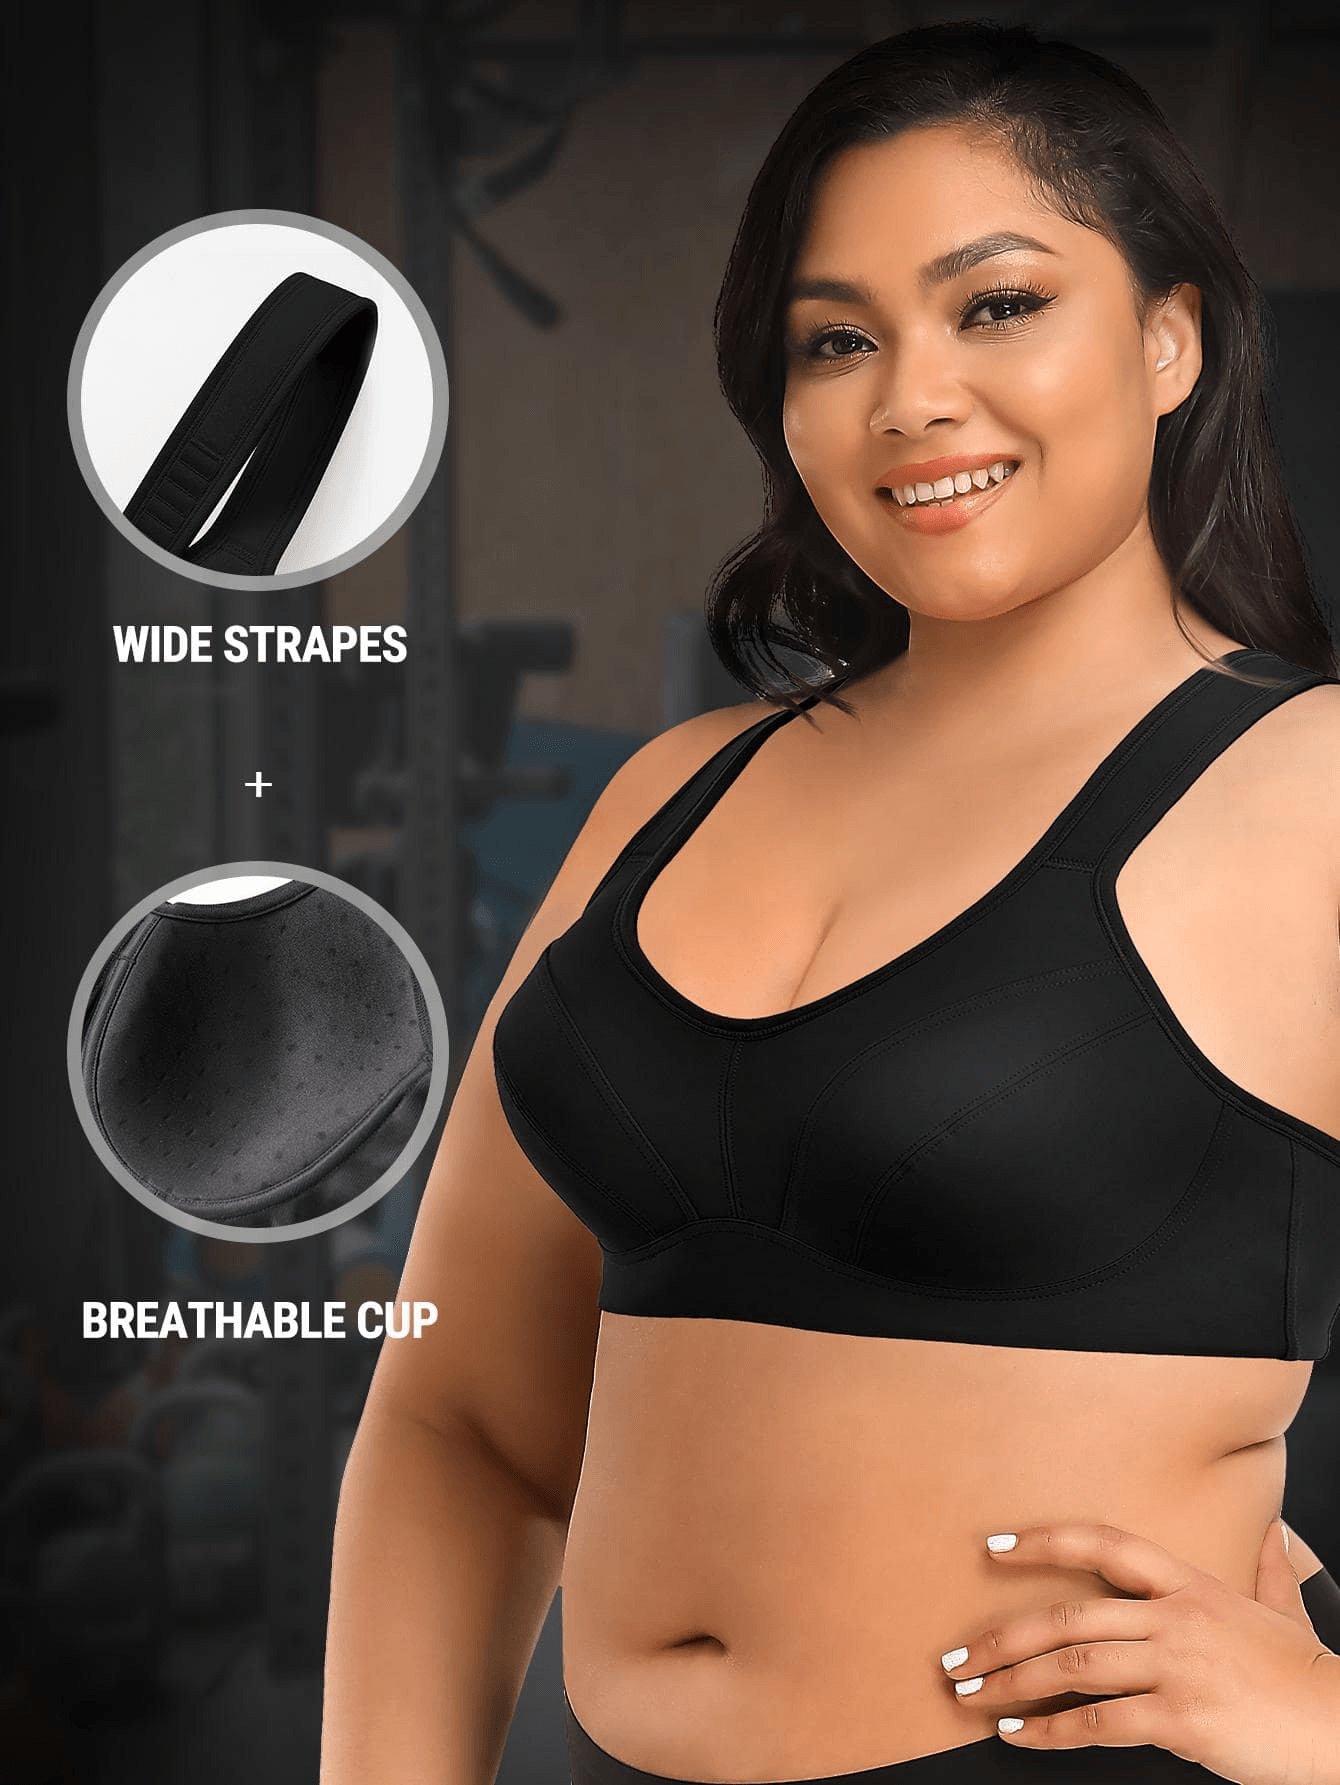 Wingslove High-Impact Sports Bras Full Coverage Underwire Workout